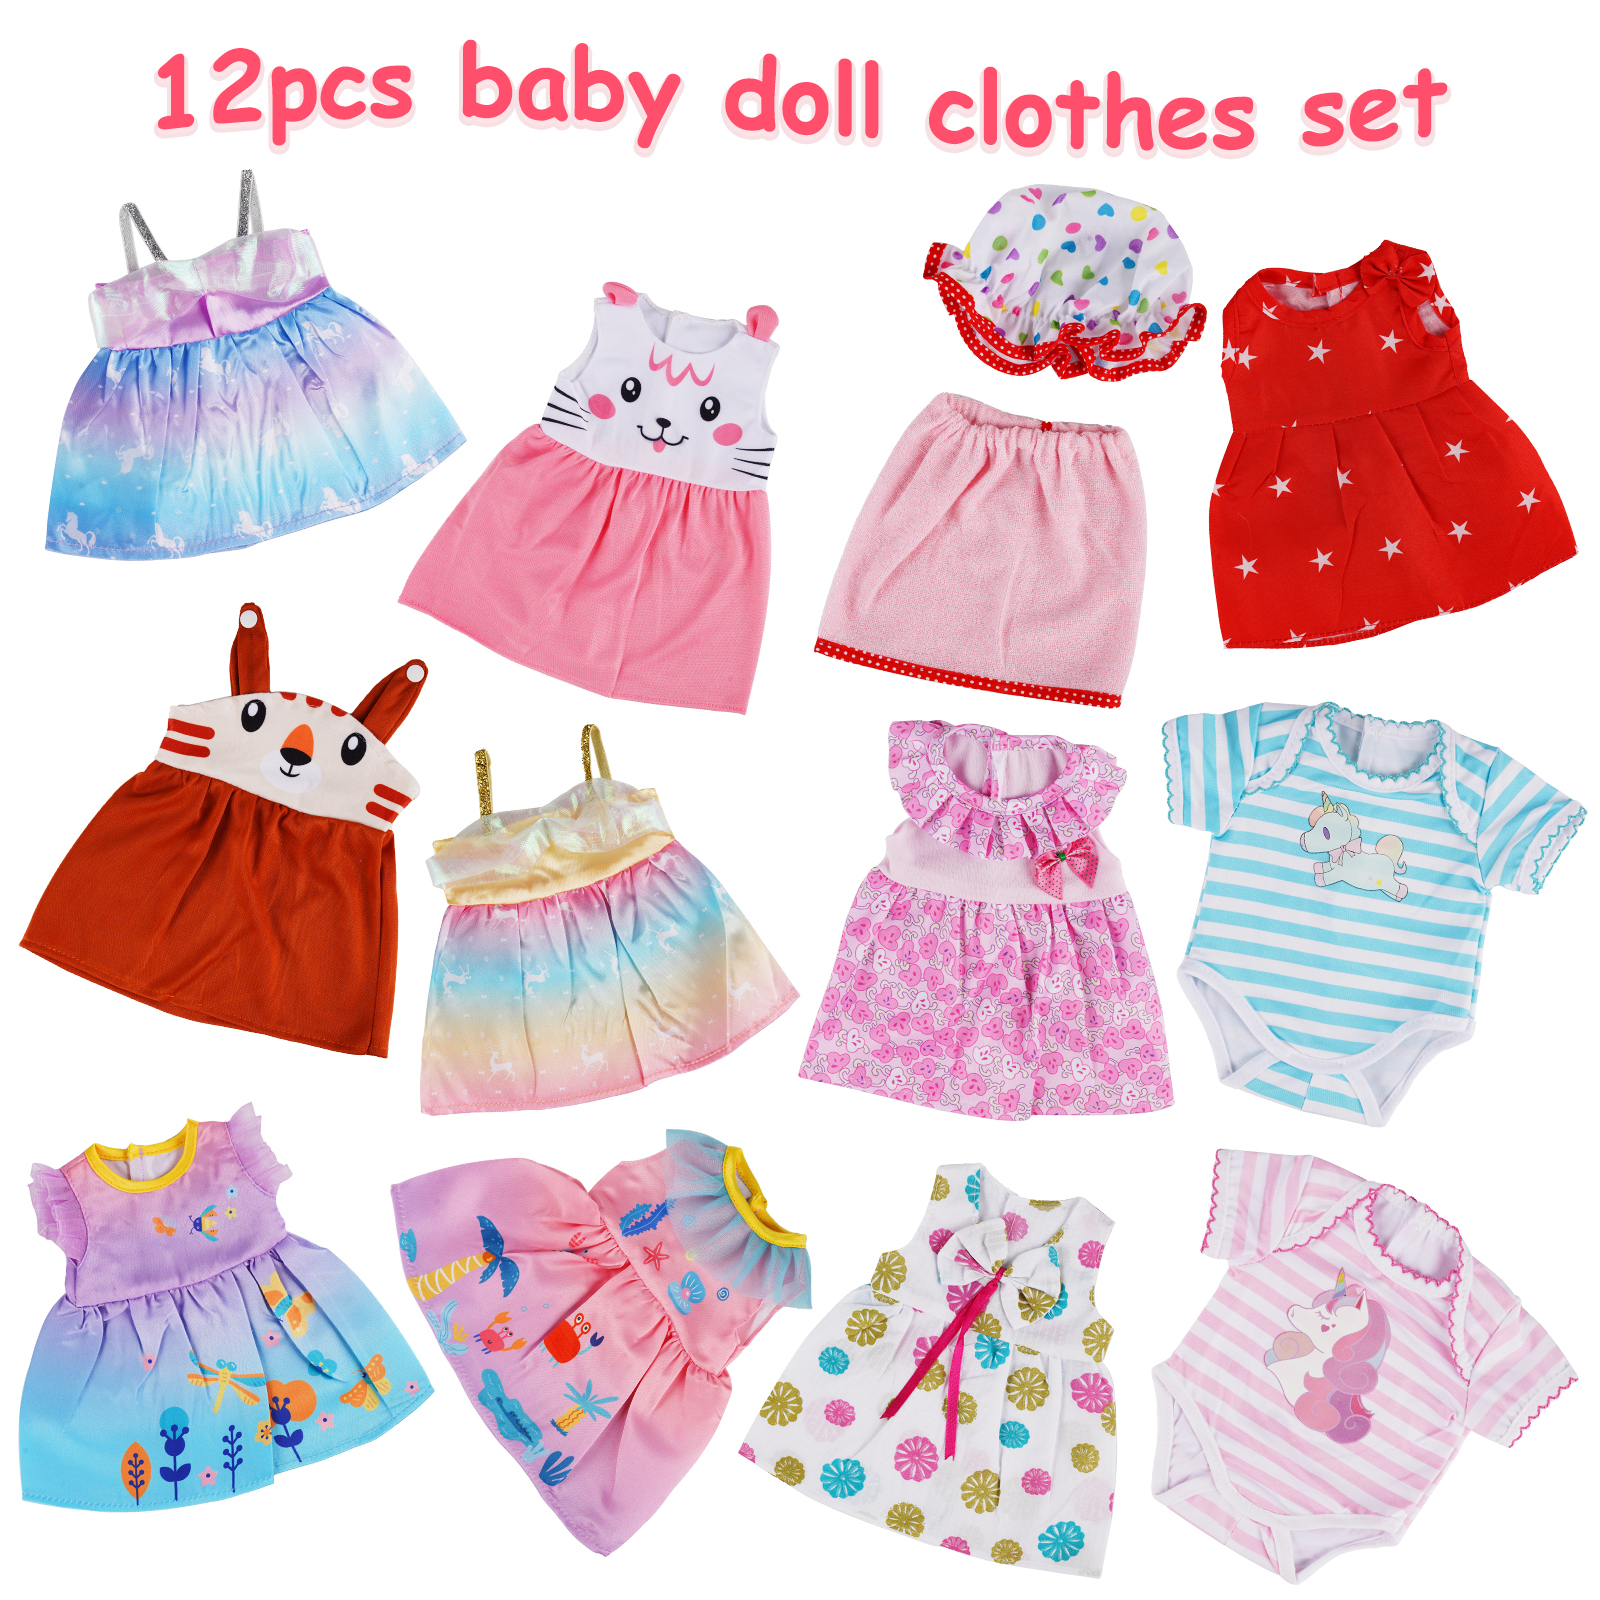 Suitable for 12''-16'' Inches Newborn Baby Dolls 12pcs Baby Doll ...